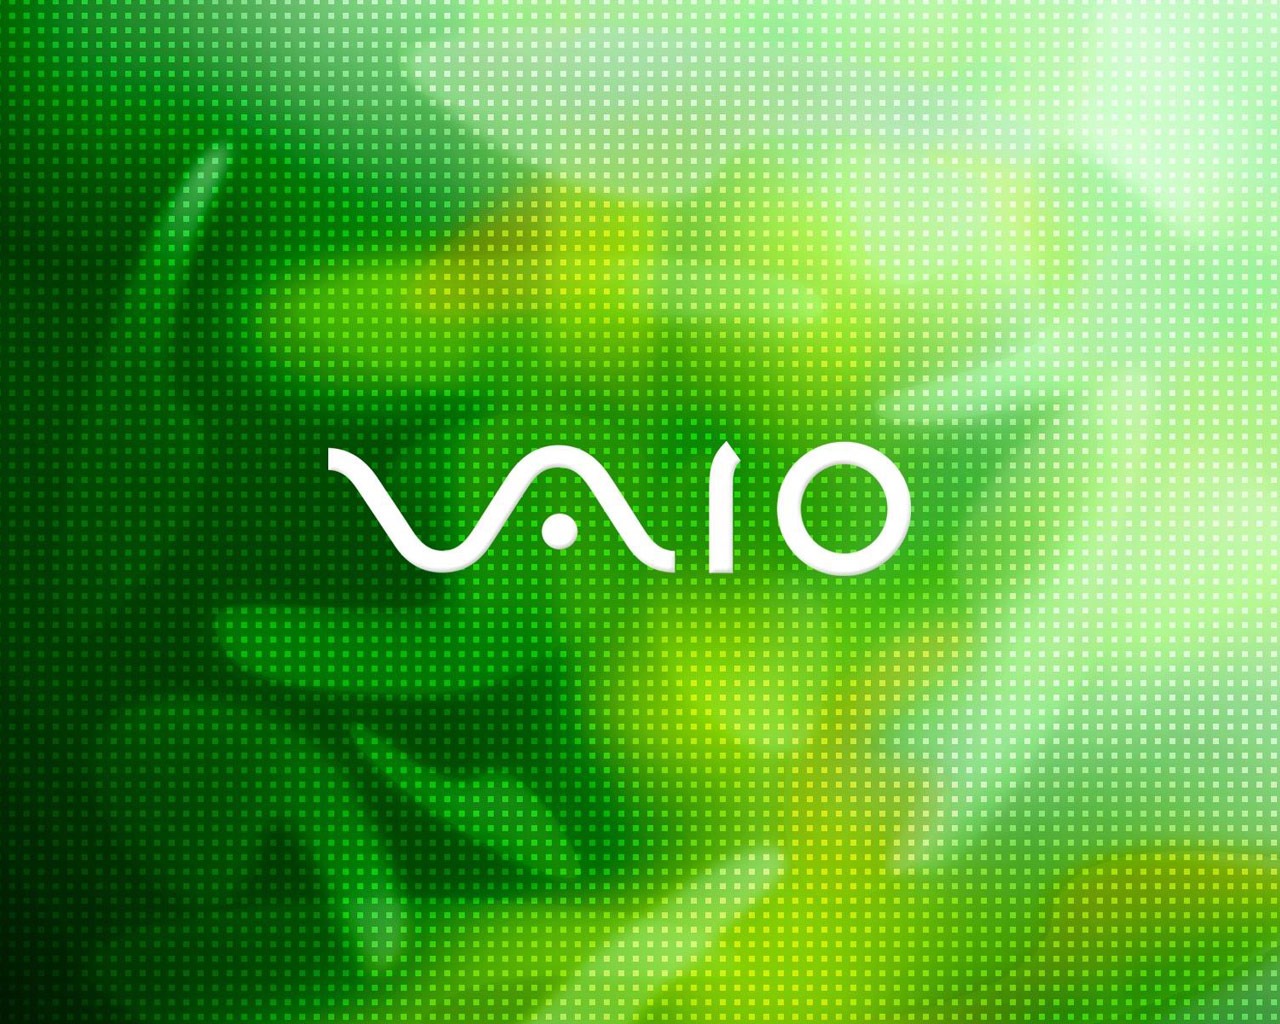 Sony Vaio Wallpaper Sony Vaio Computers Wallpapers In Jpg Format For Free Download